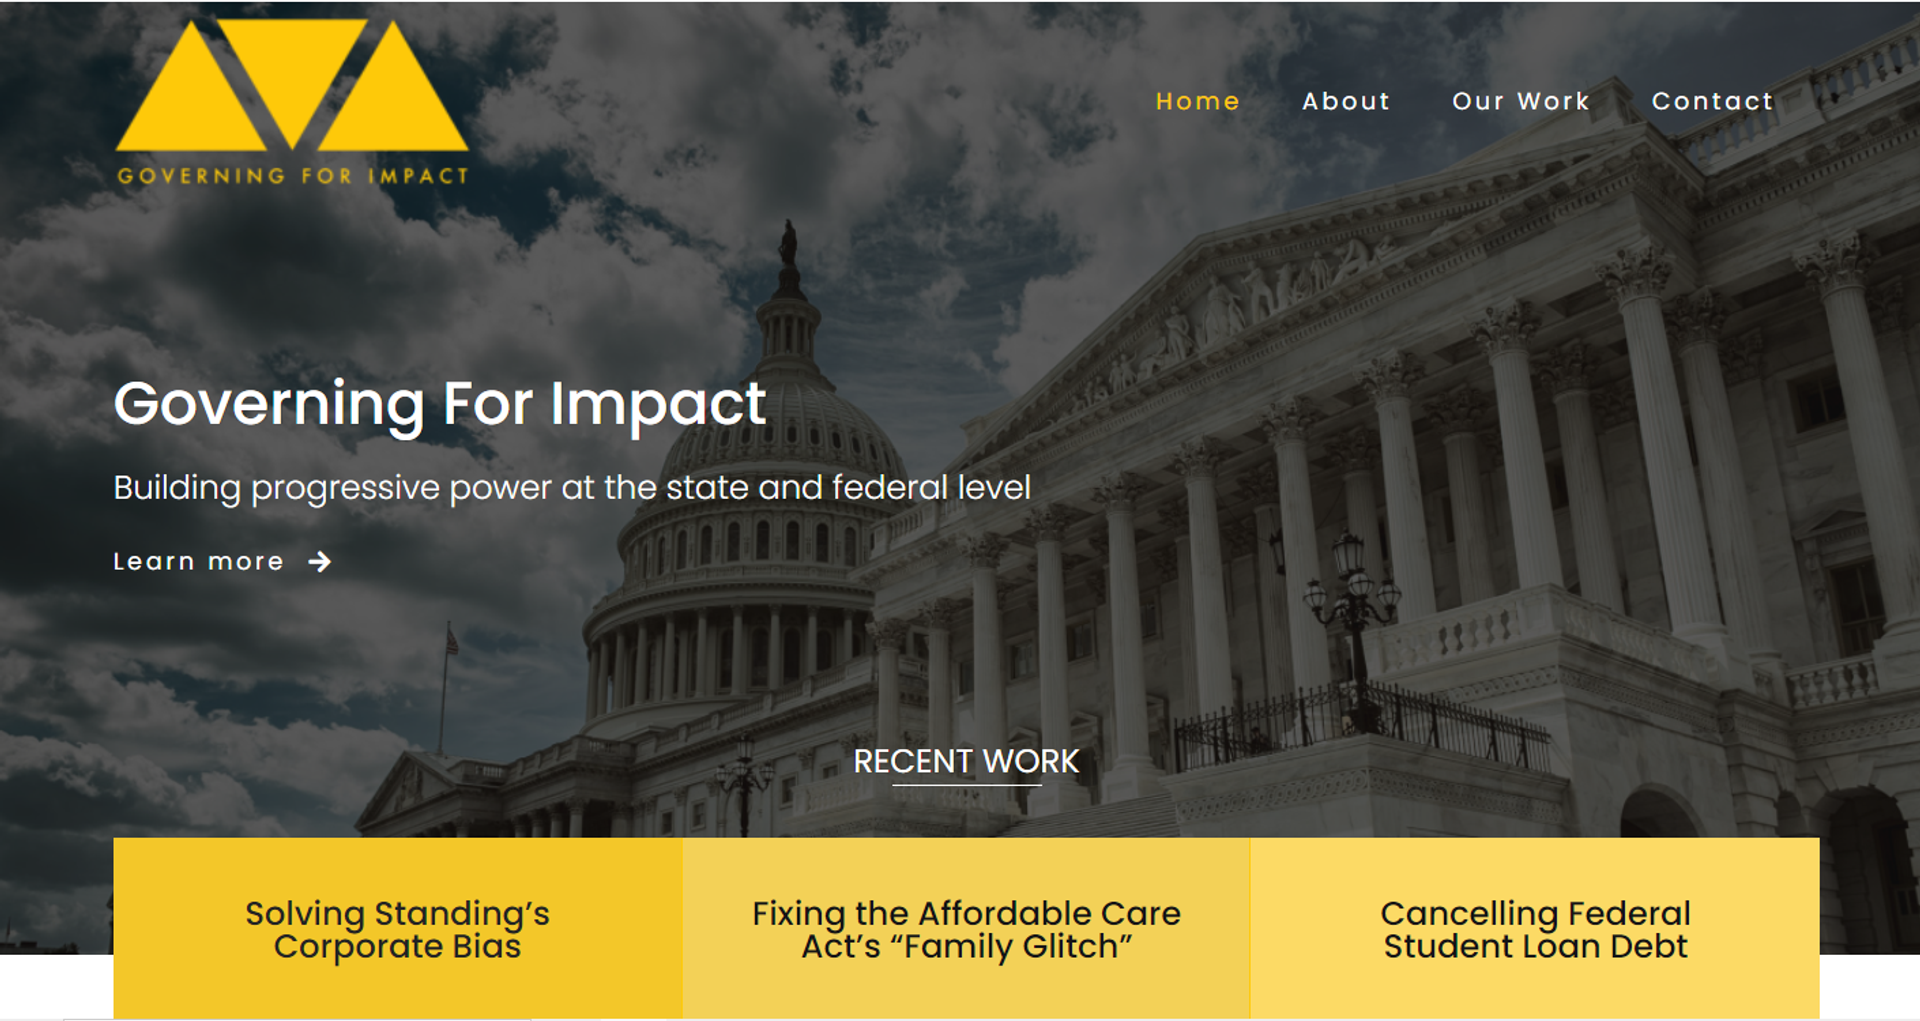 Screengrab of the Governing for Impact website landing page. The website is not accessible by search engine. - Sputnik International, 1920, 26.04.2022